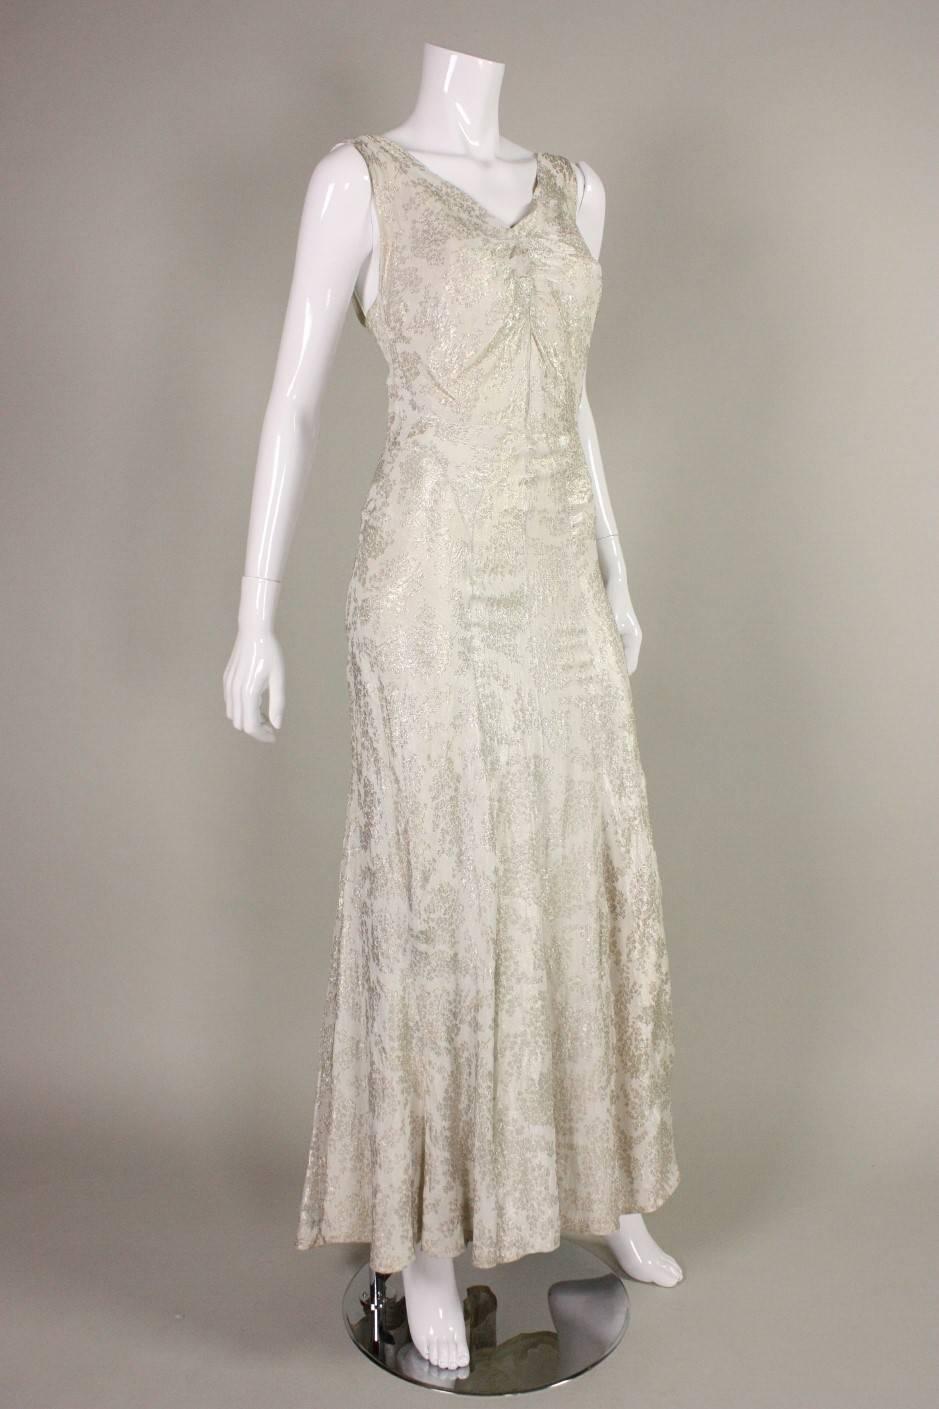 Vintage gown dates to the 1930's and is made of cream metallic lamé fabric.  Sleeveless bodice has v-neck and center front ruching at bust.  Fantastic seam detailing around waist, hips, and down the center back.  Unlined, but comes with slip. 